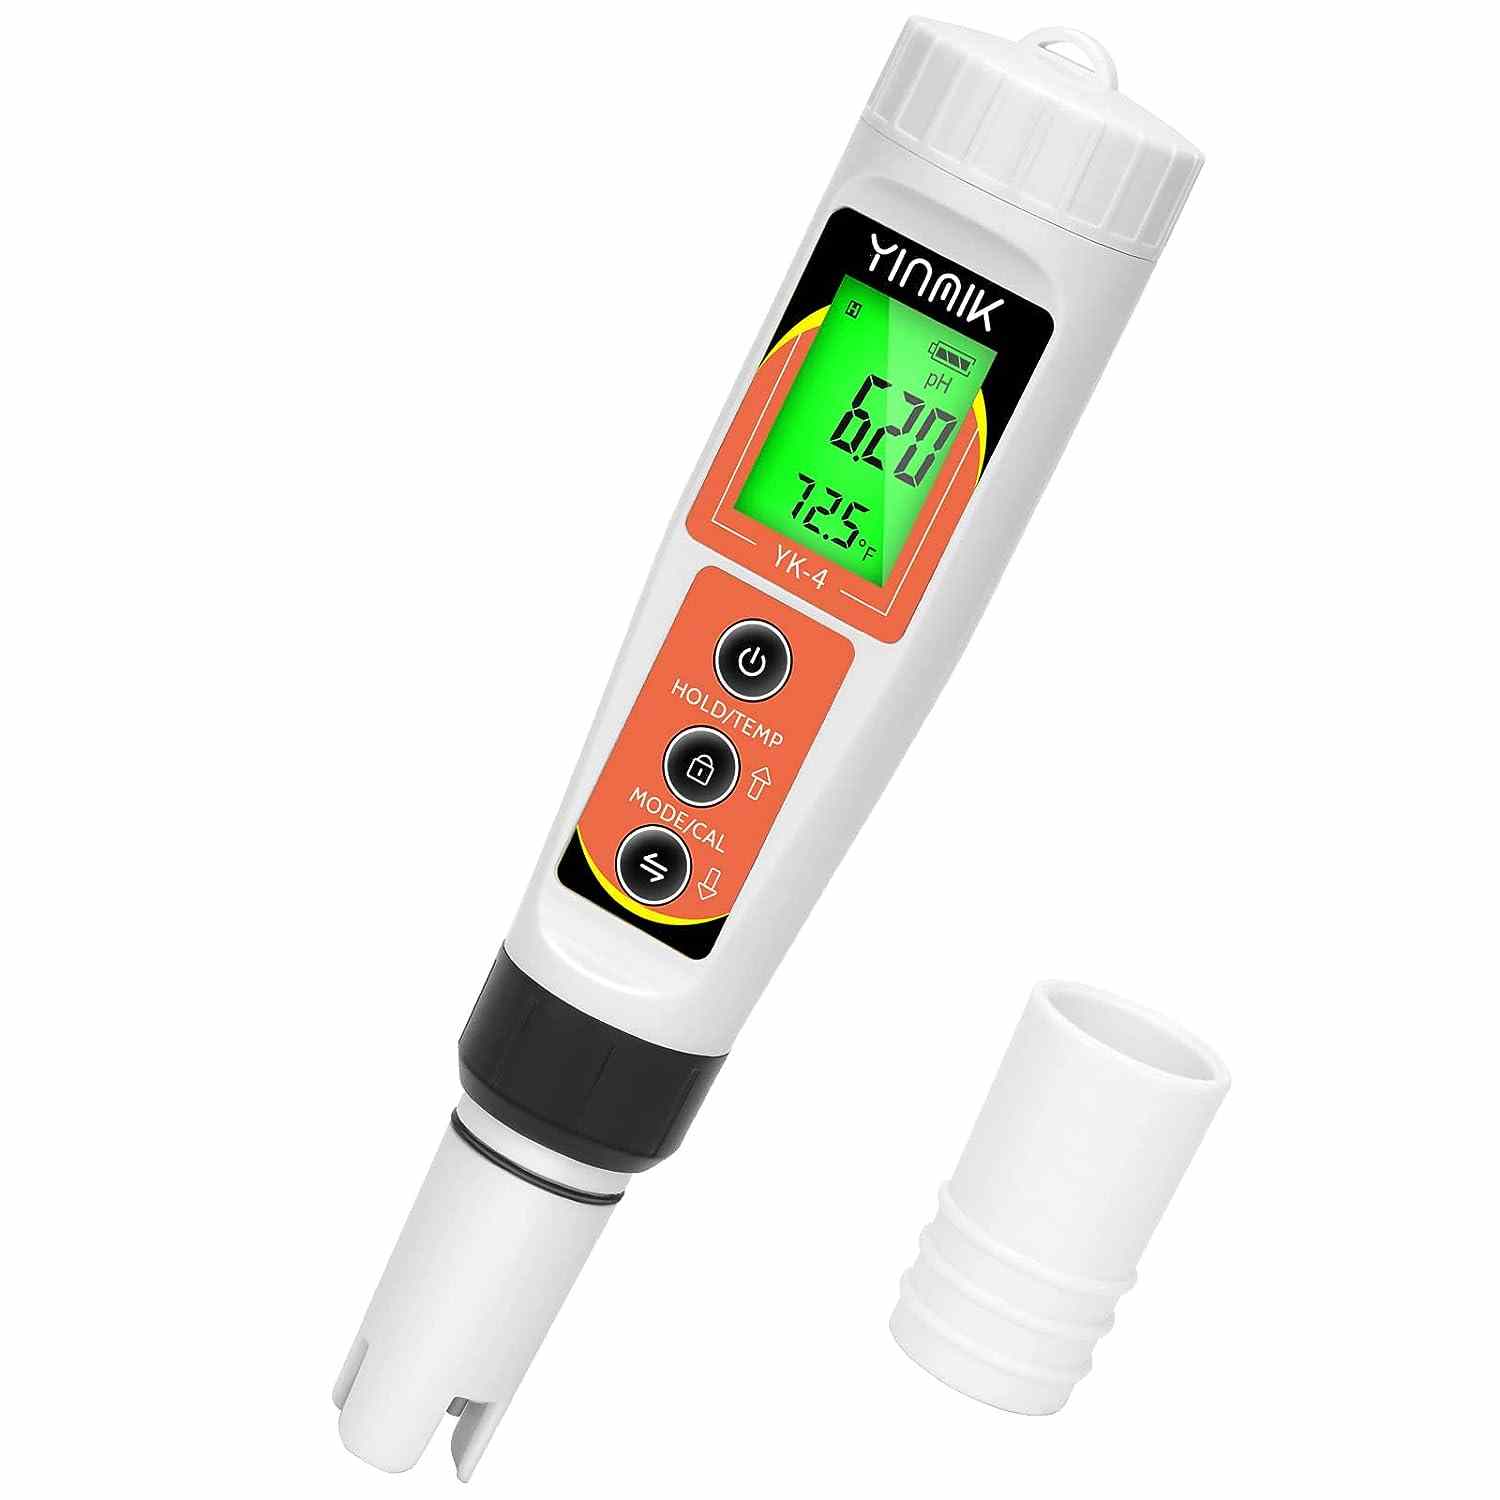 Select a good pH meter for brewing 